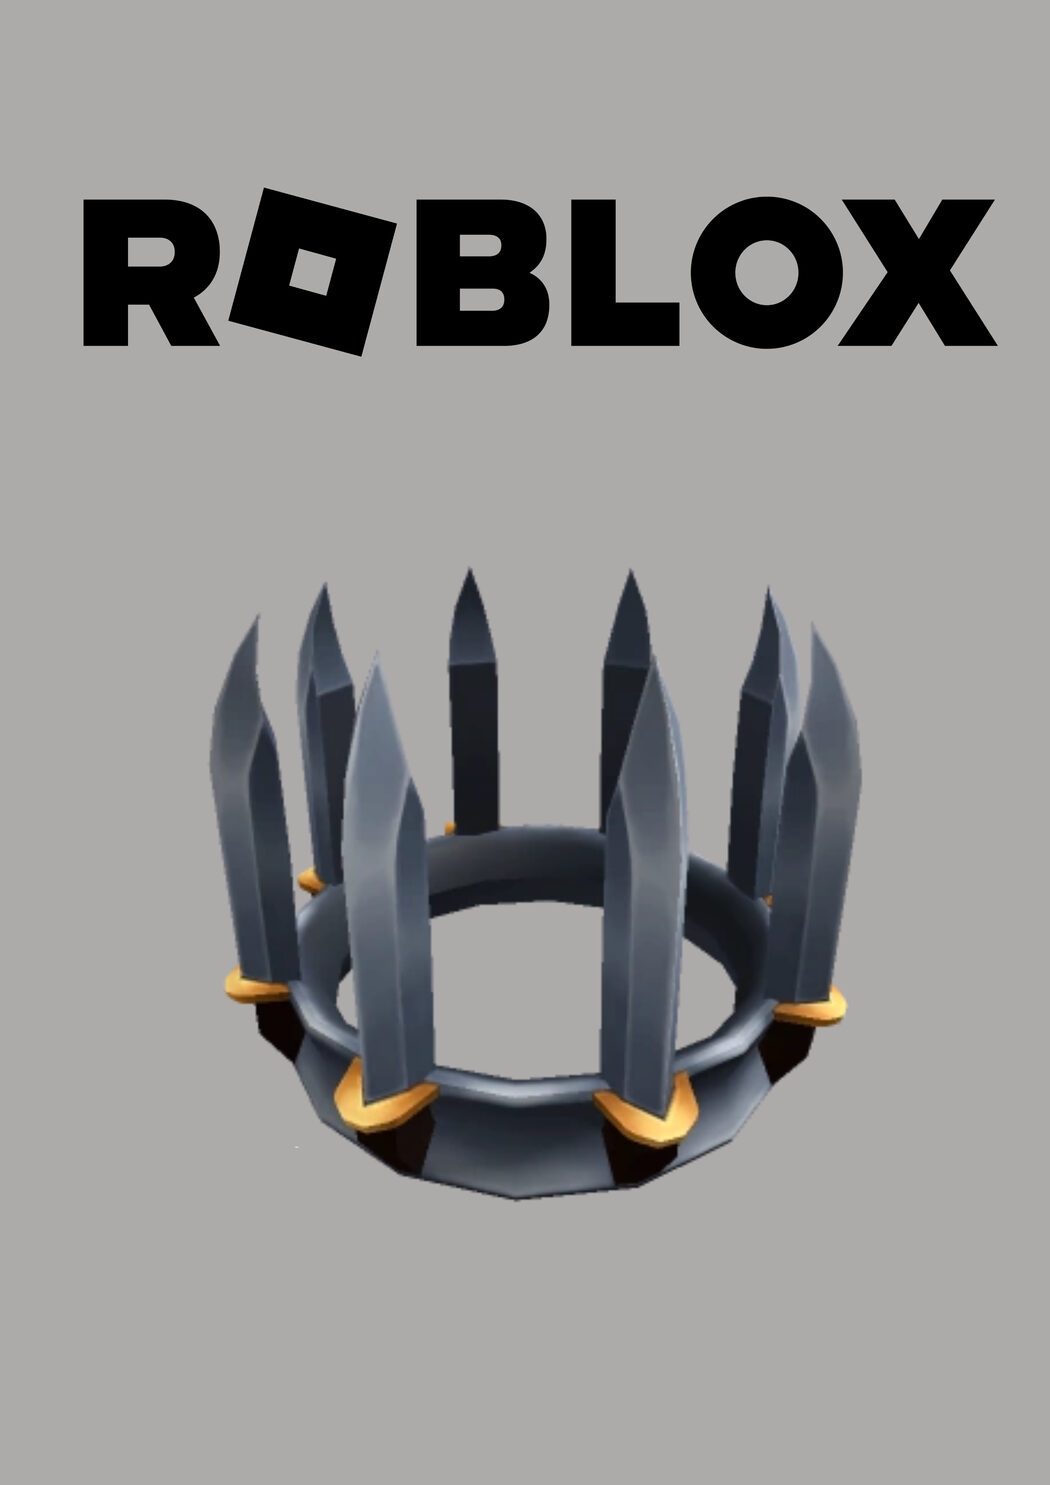 Affordable roblox mm2 For Sale, In-Game Products